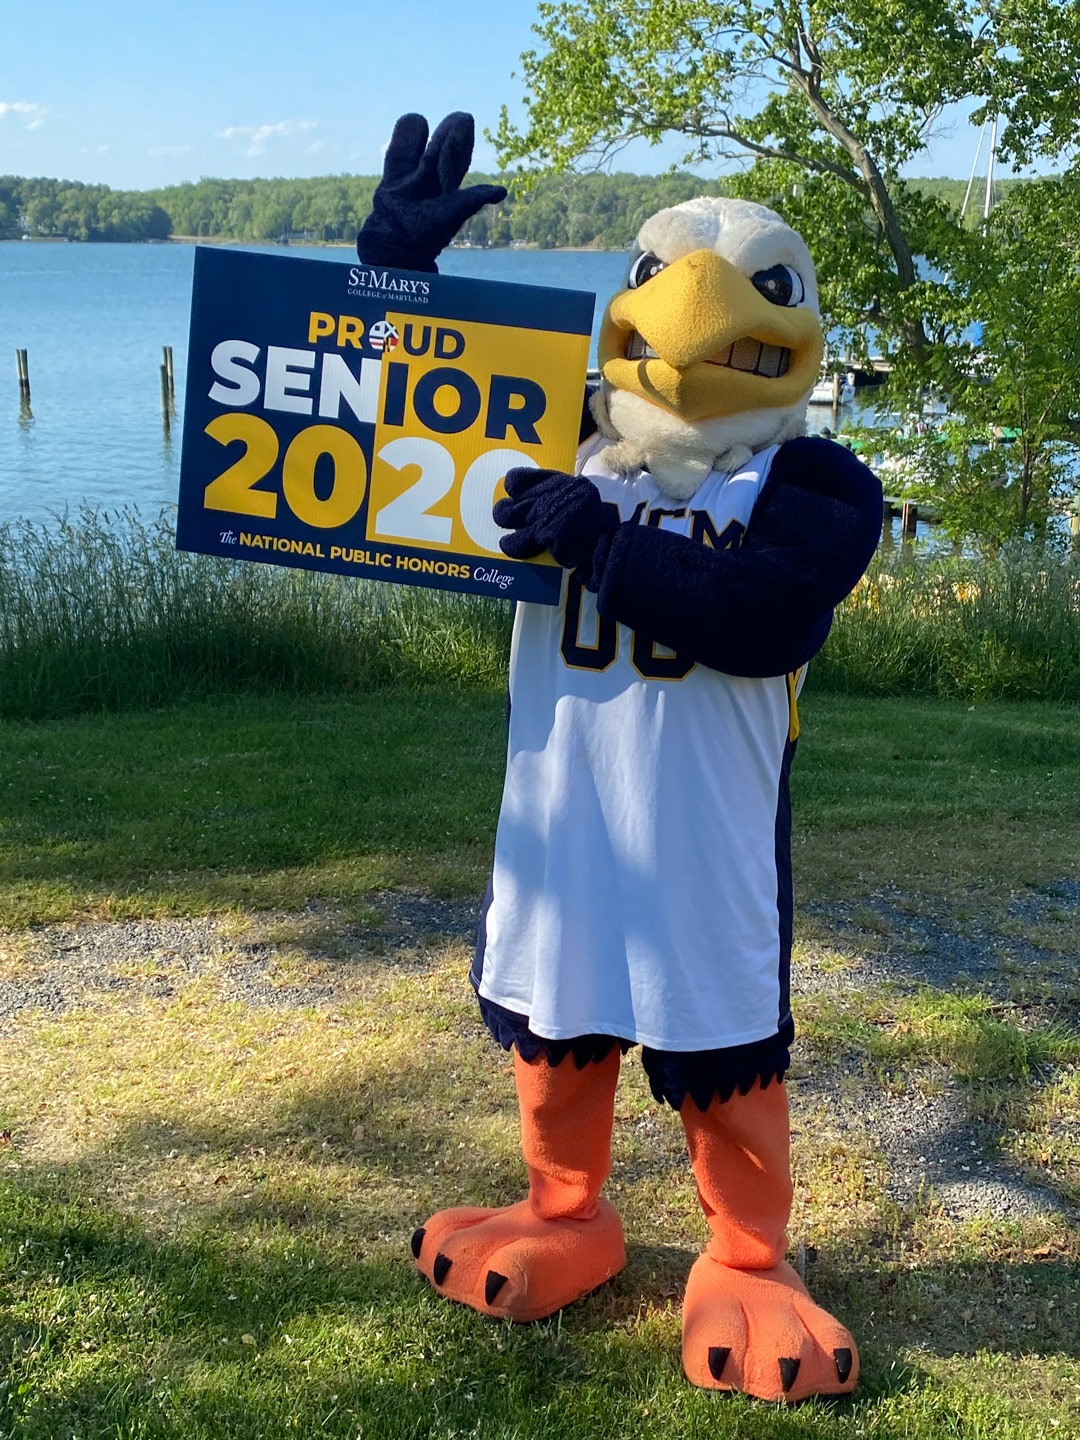 Solomon the Seahawk waving the Proud Senior 2020 sign for SMCM graduates by the St. Mary's River